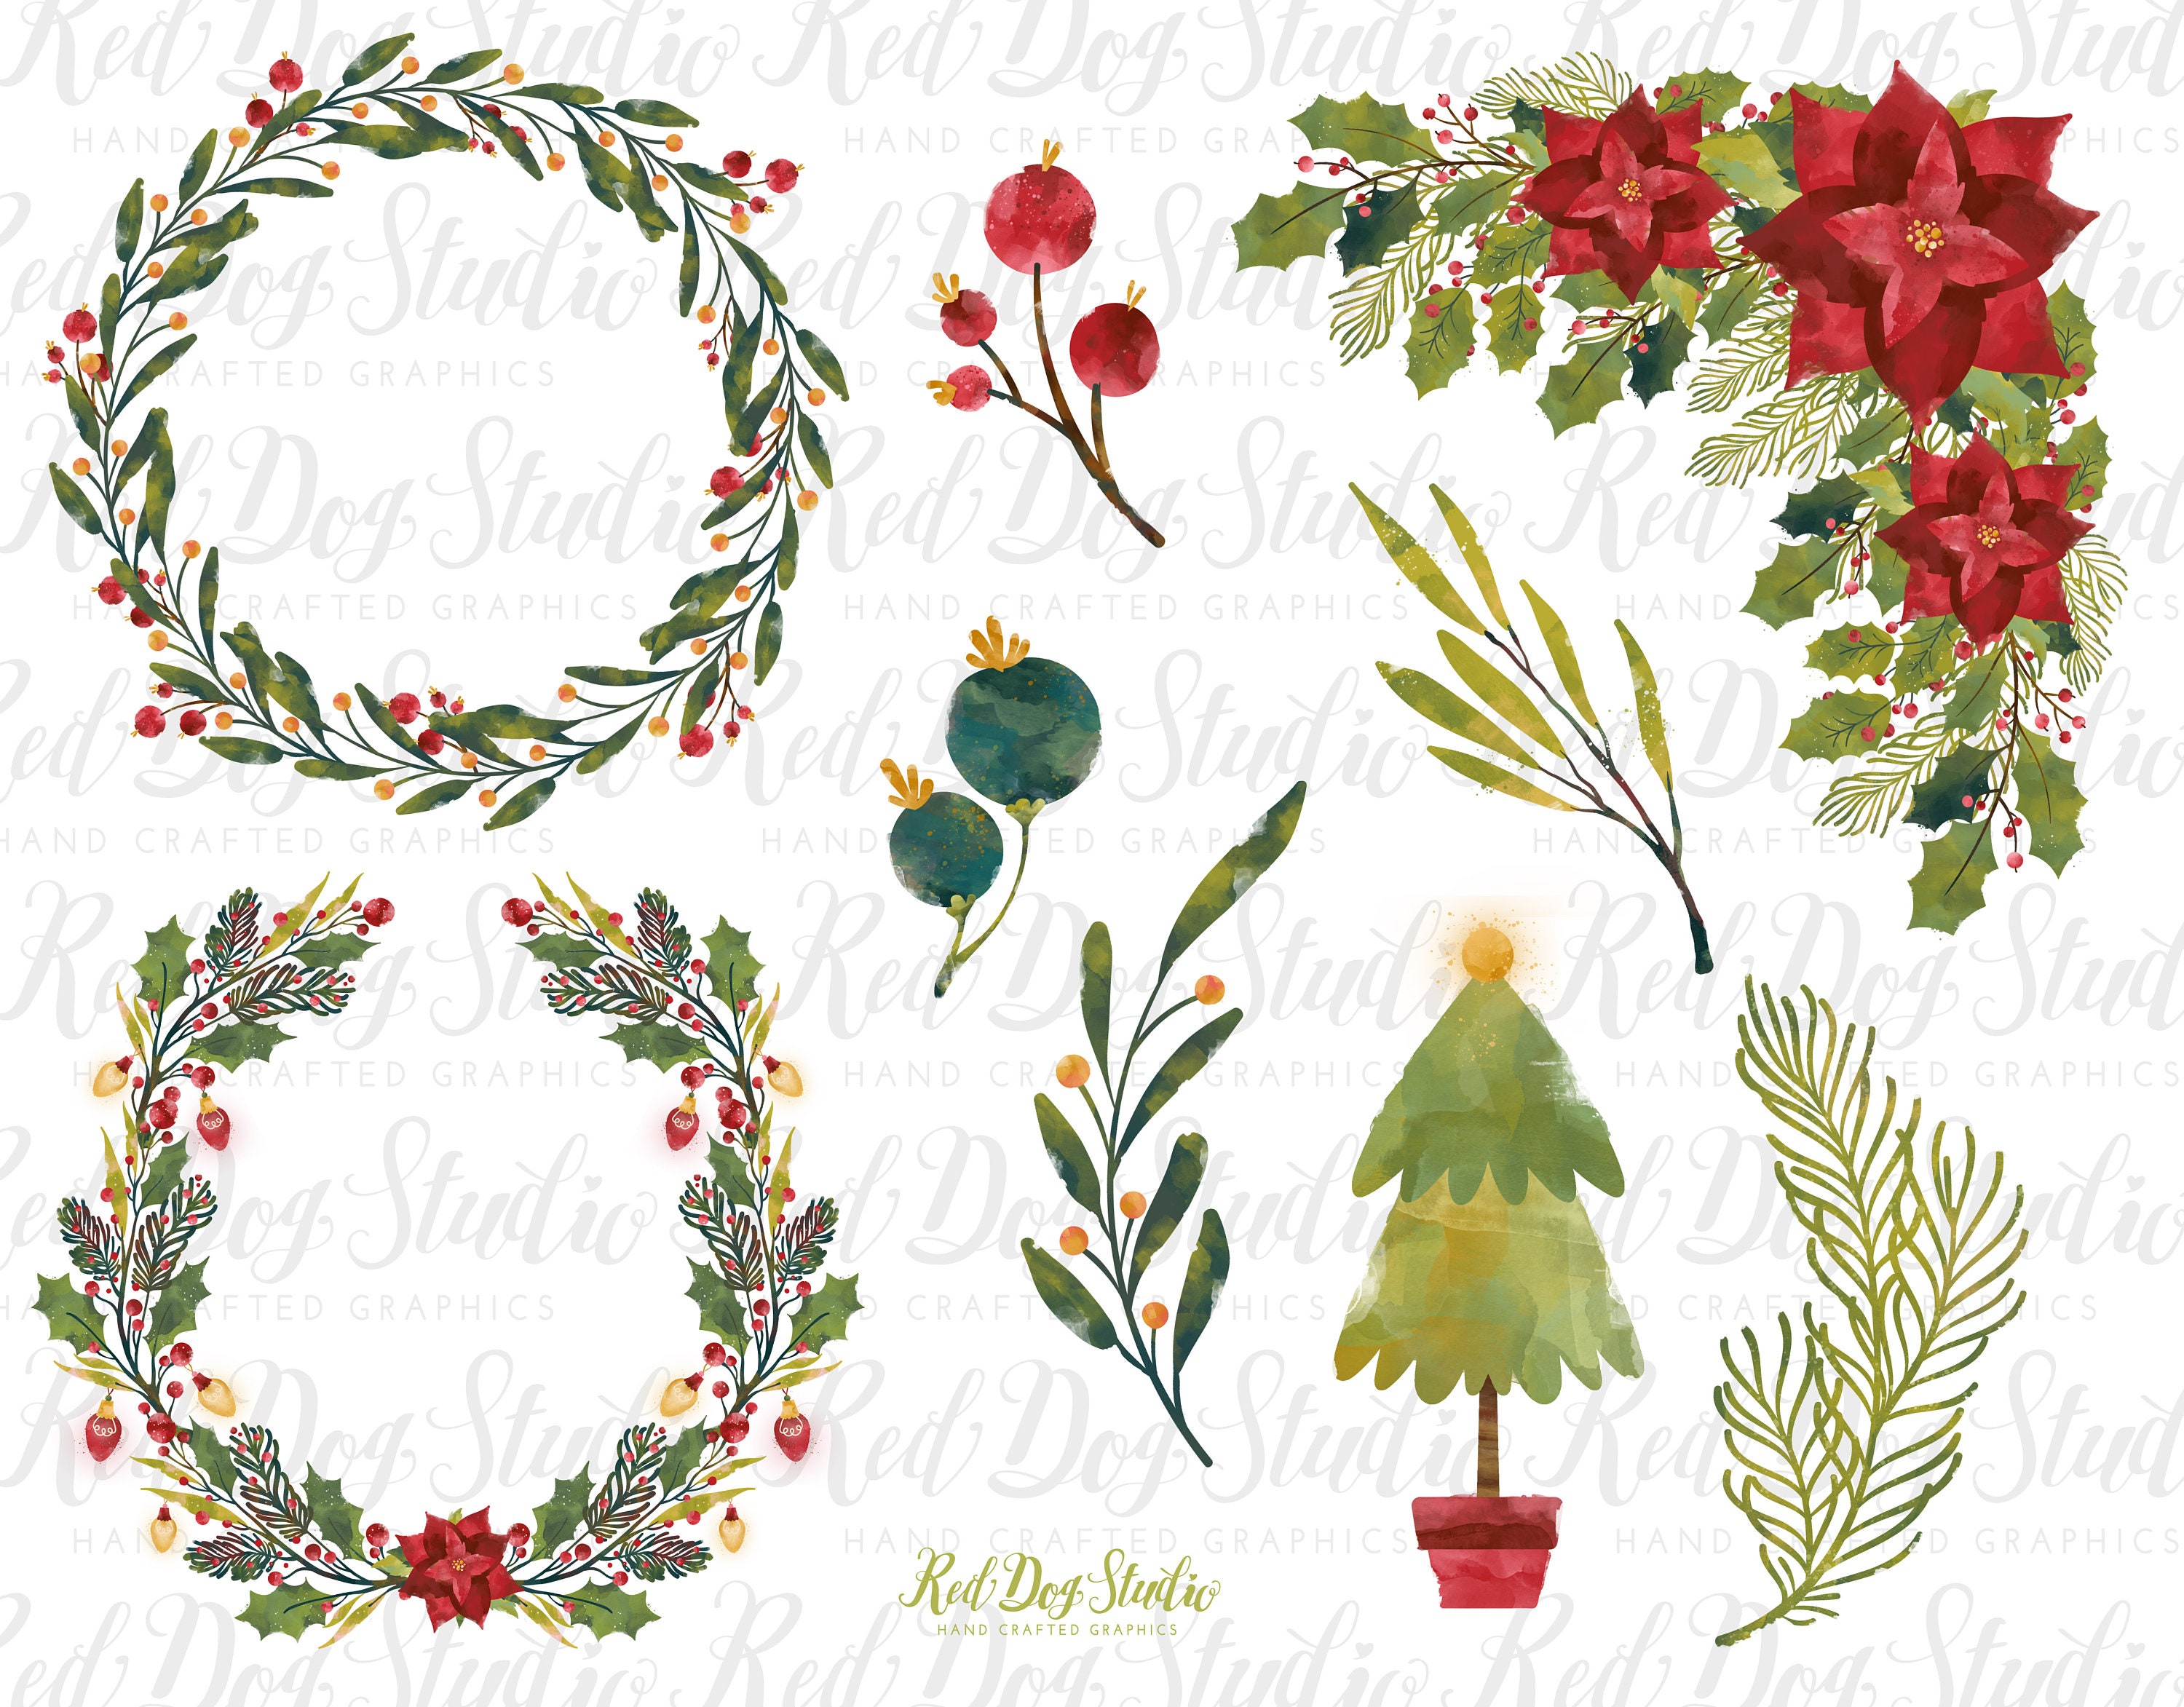 Christmas Greenery Clipart Transparent Graphic by Laura Beth Love